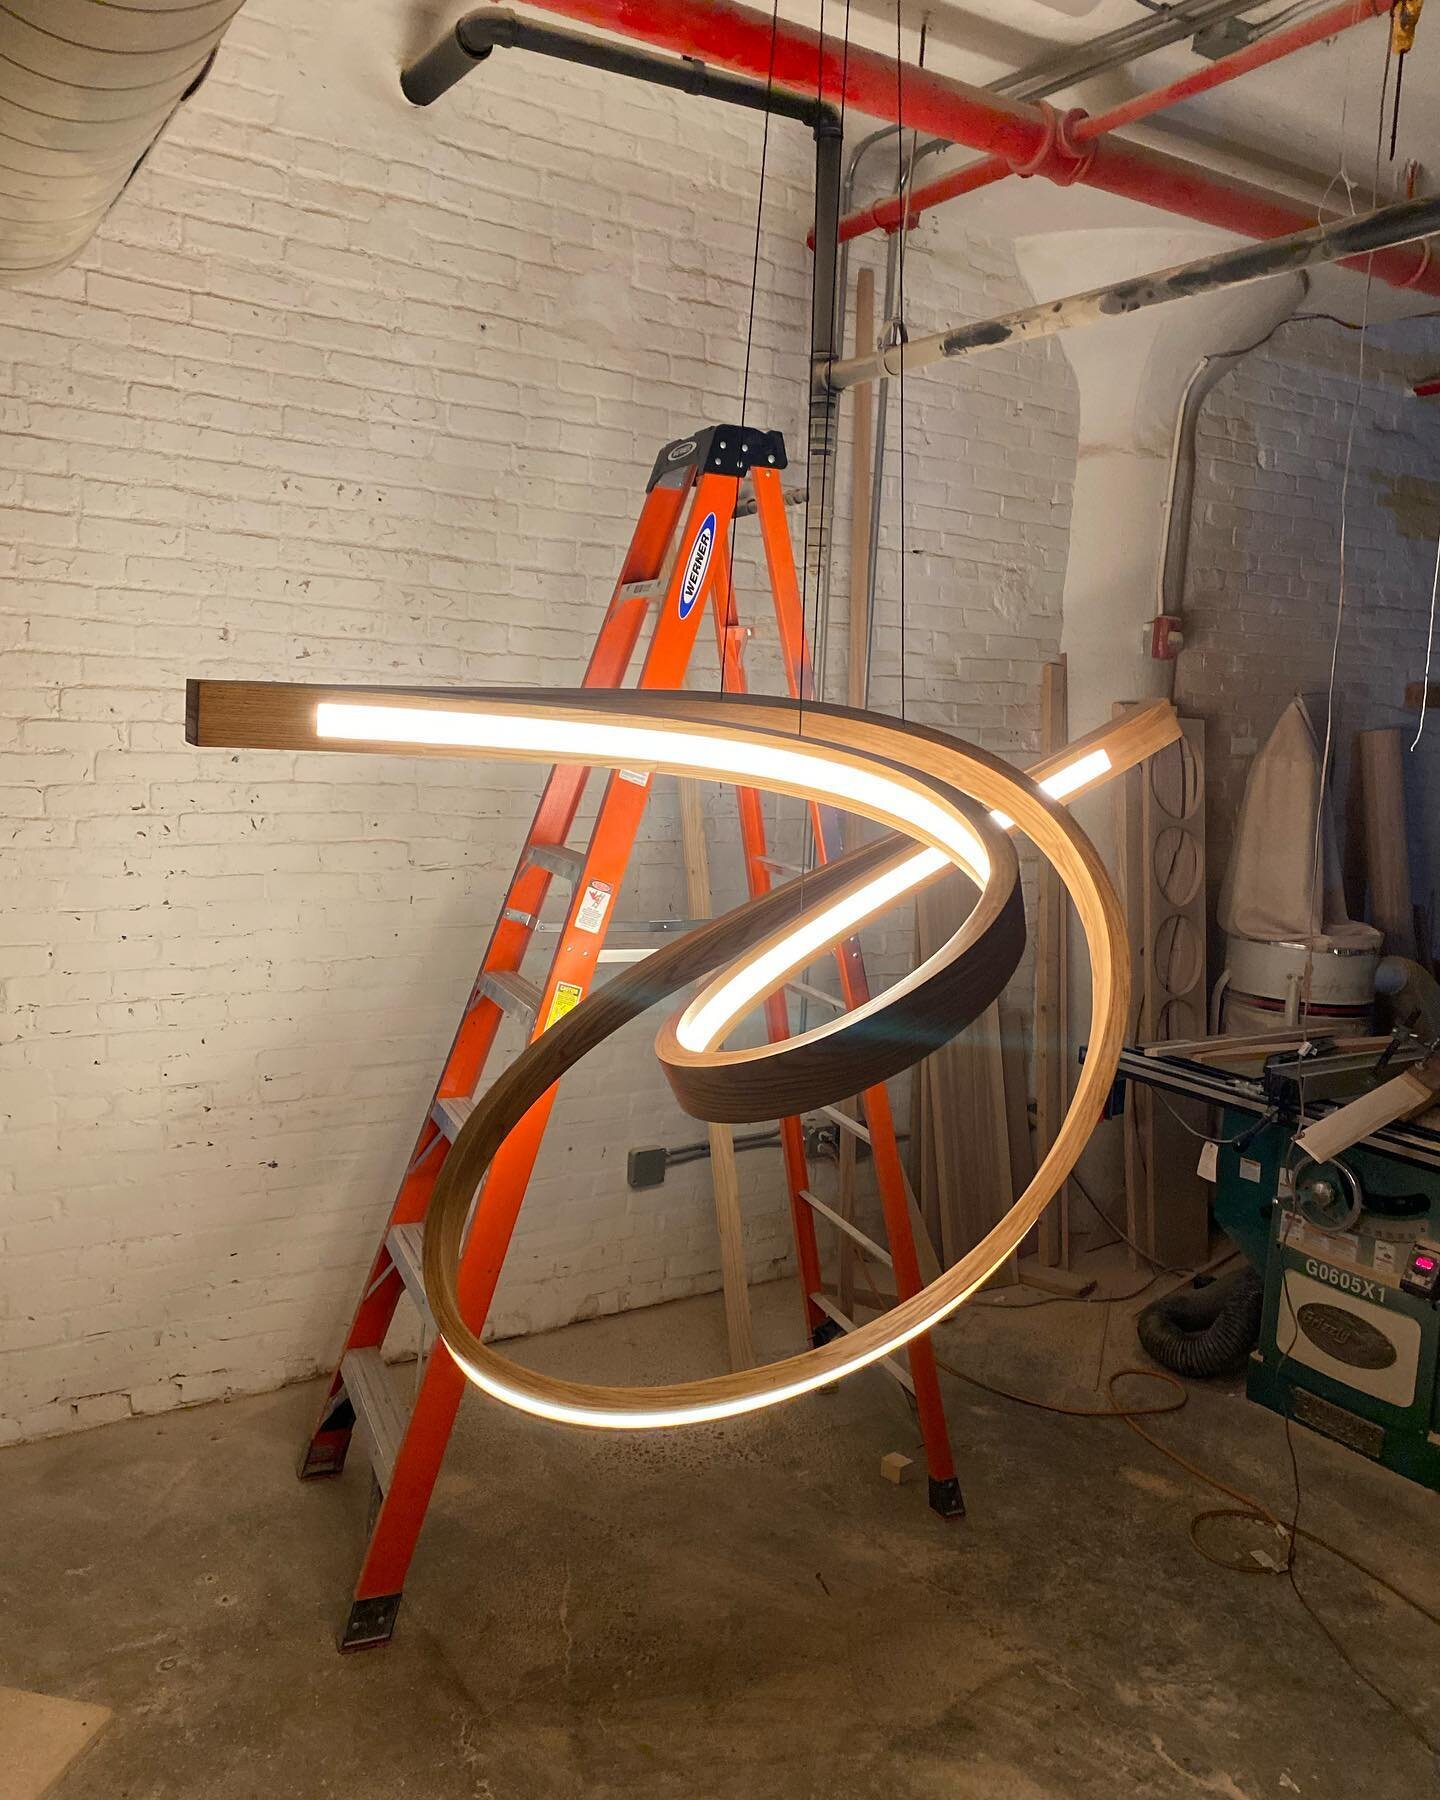 Sneak peek of a new handmade fixture by @ovuud  for one of our clients. Looking forward to seeing it in its new home soon!
-
#customfixtures #lighting #modernlighting #woven #led #daaronbuilders #centerpieces #modernarchitecture #realwood